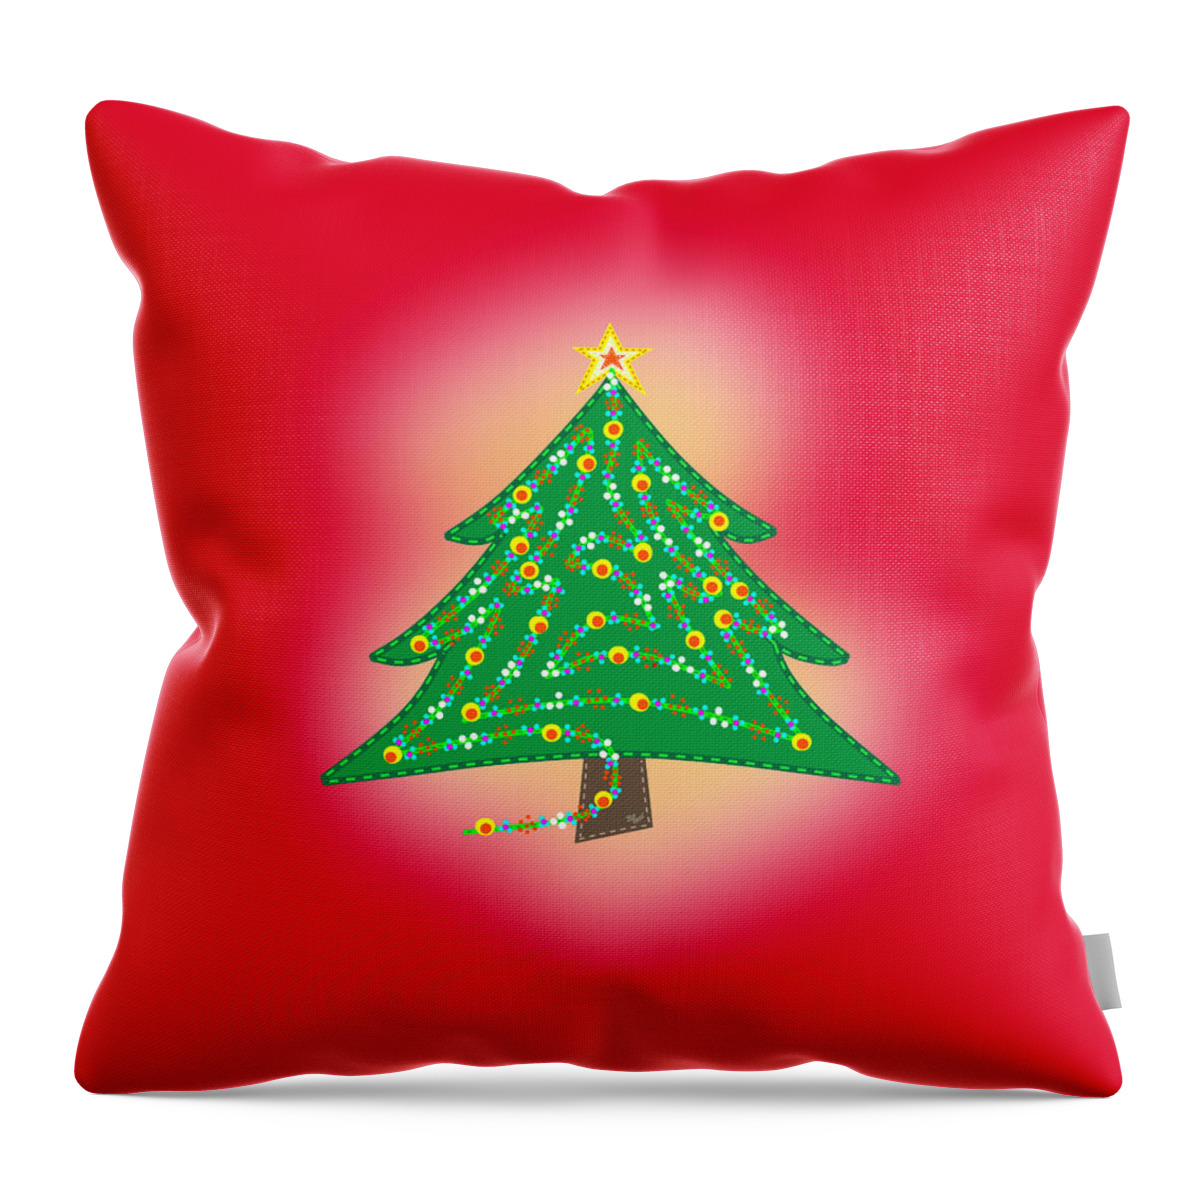 Christmas Tree Throw Pillow featuring the digital art Discover XMAS - Christmas Art by Bill Ressl